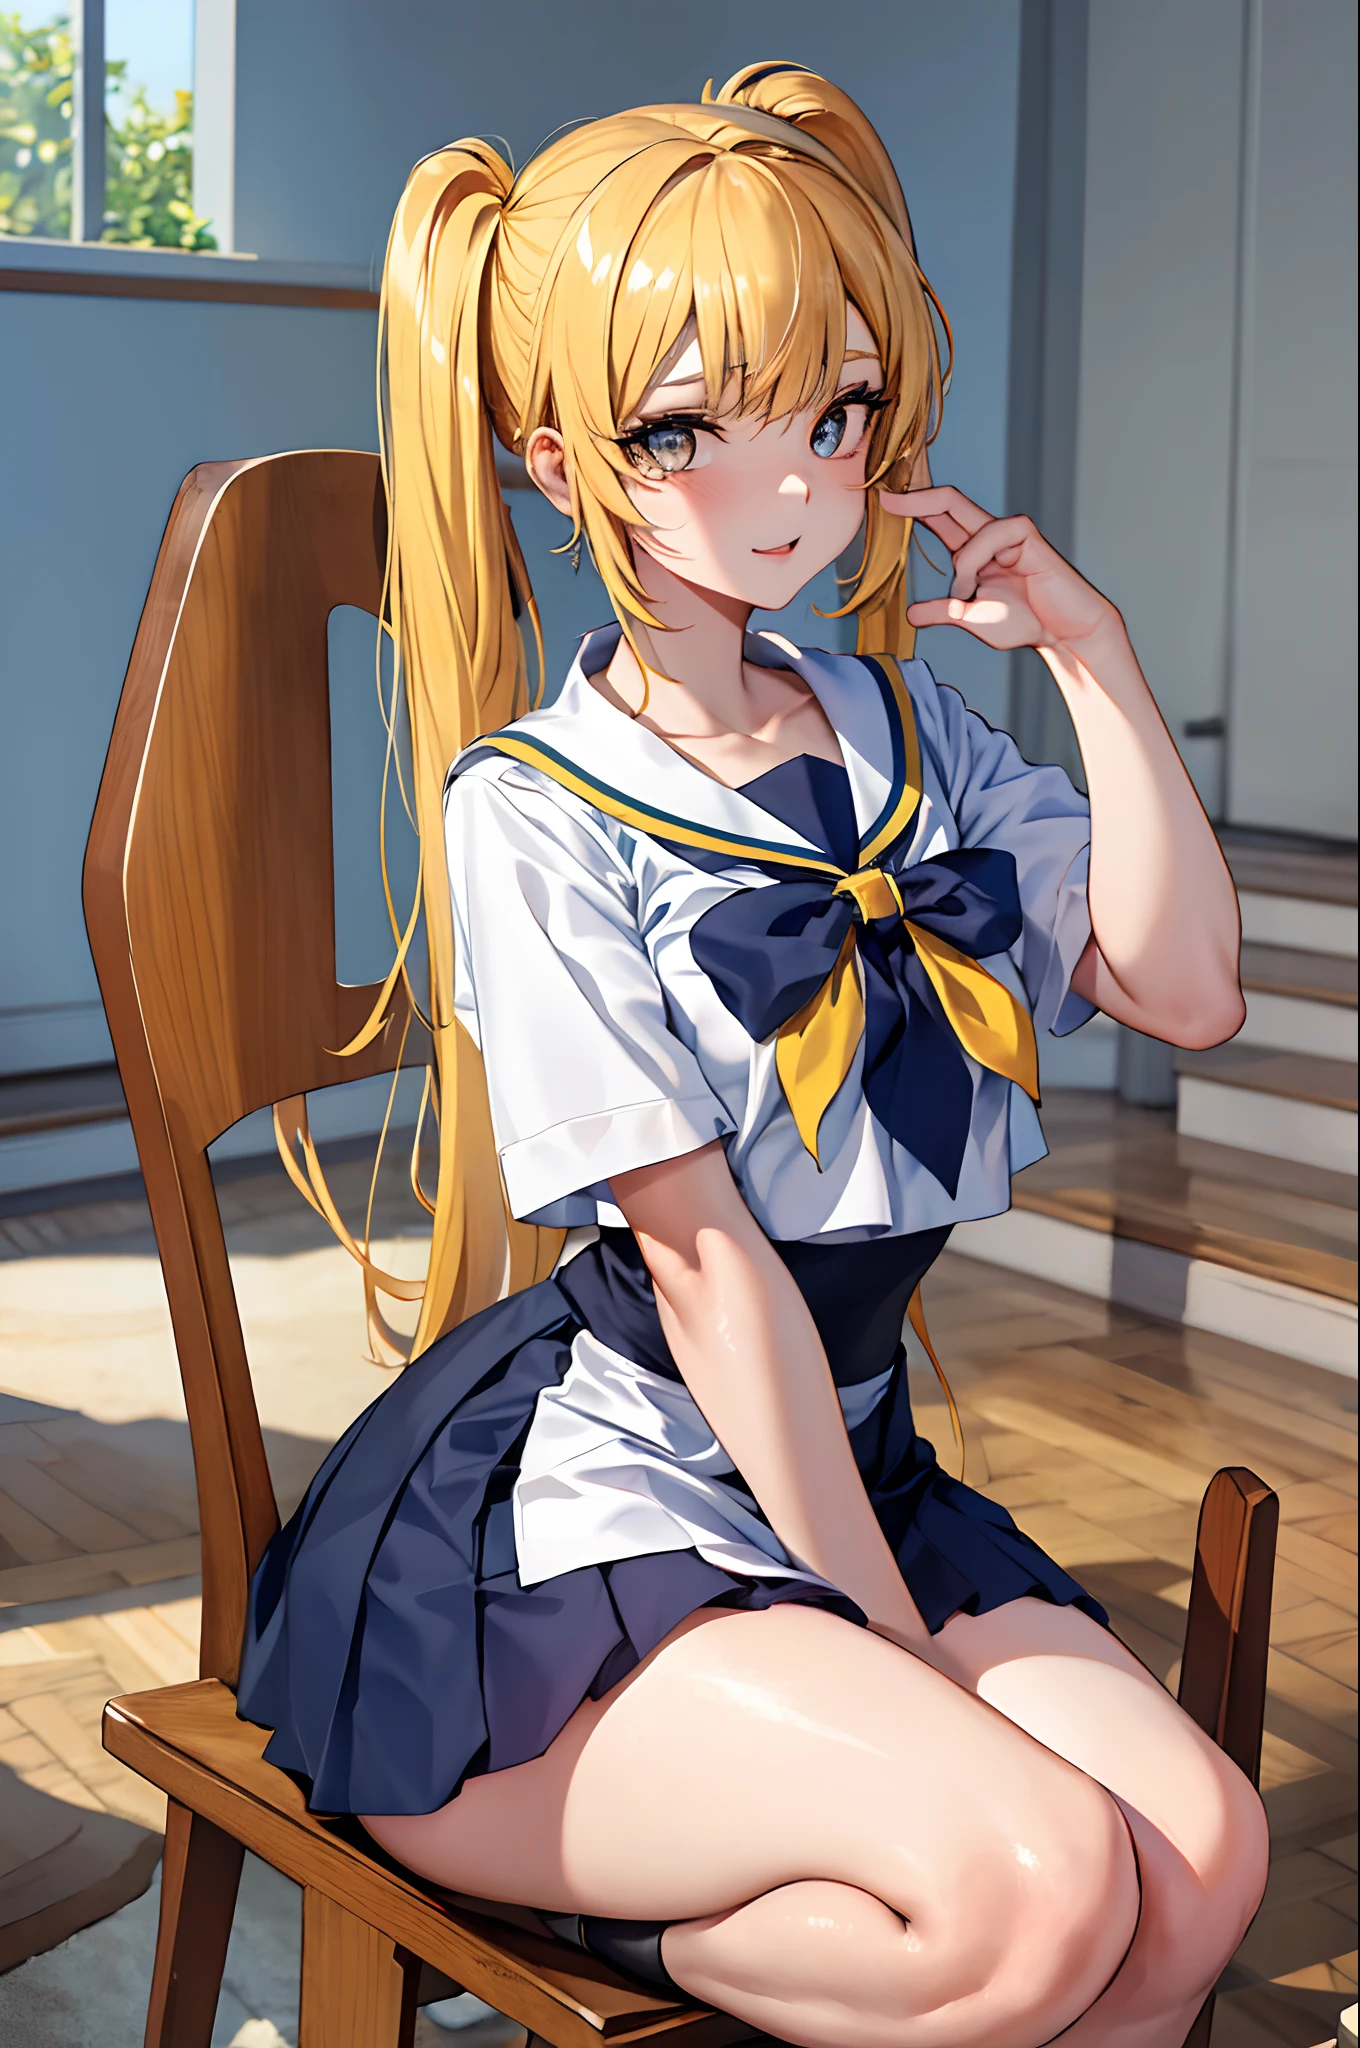 (Masterpiece artwork: 1.2, best qualityer), 1lady, 独奏, short school uniform, open blouse, class room, giorno, sit, blonde, twintails, Eyes red, open clavicle, skin fair, (Breasts Open: 1.1),